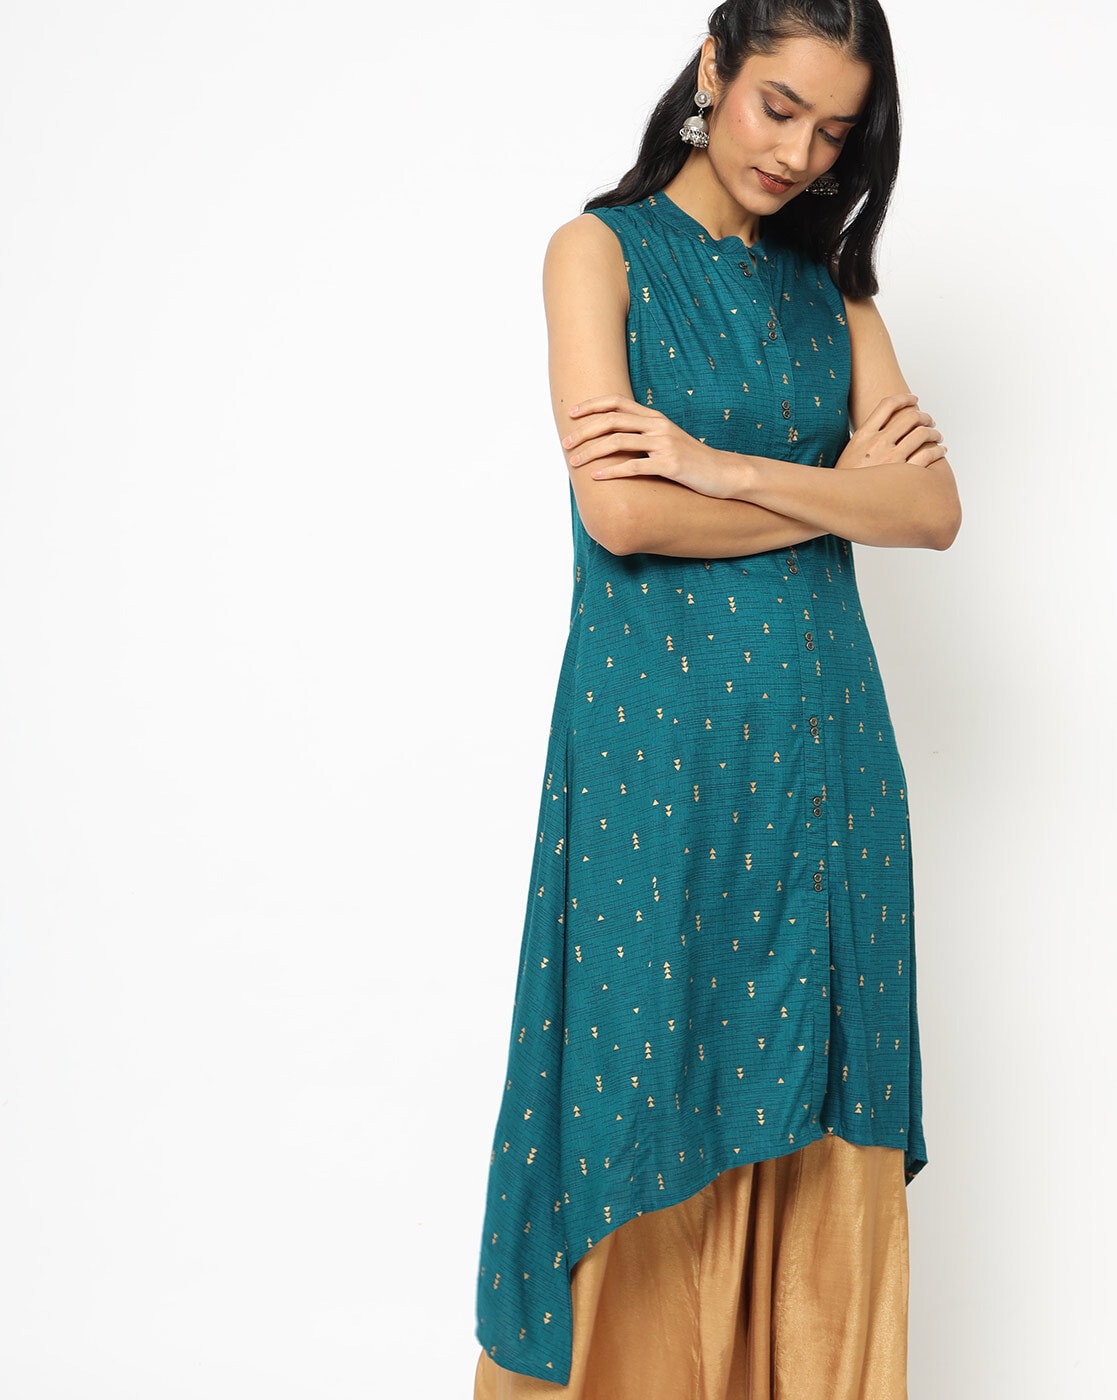 Get 40% Discount On Kurtis With Reliance Trends Offers - Fashion  Accessories in Noida, 144974789 - Clickindia